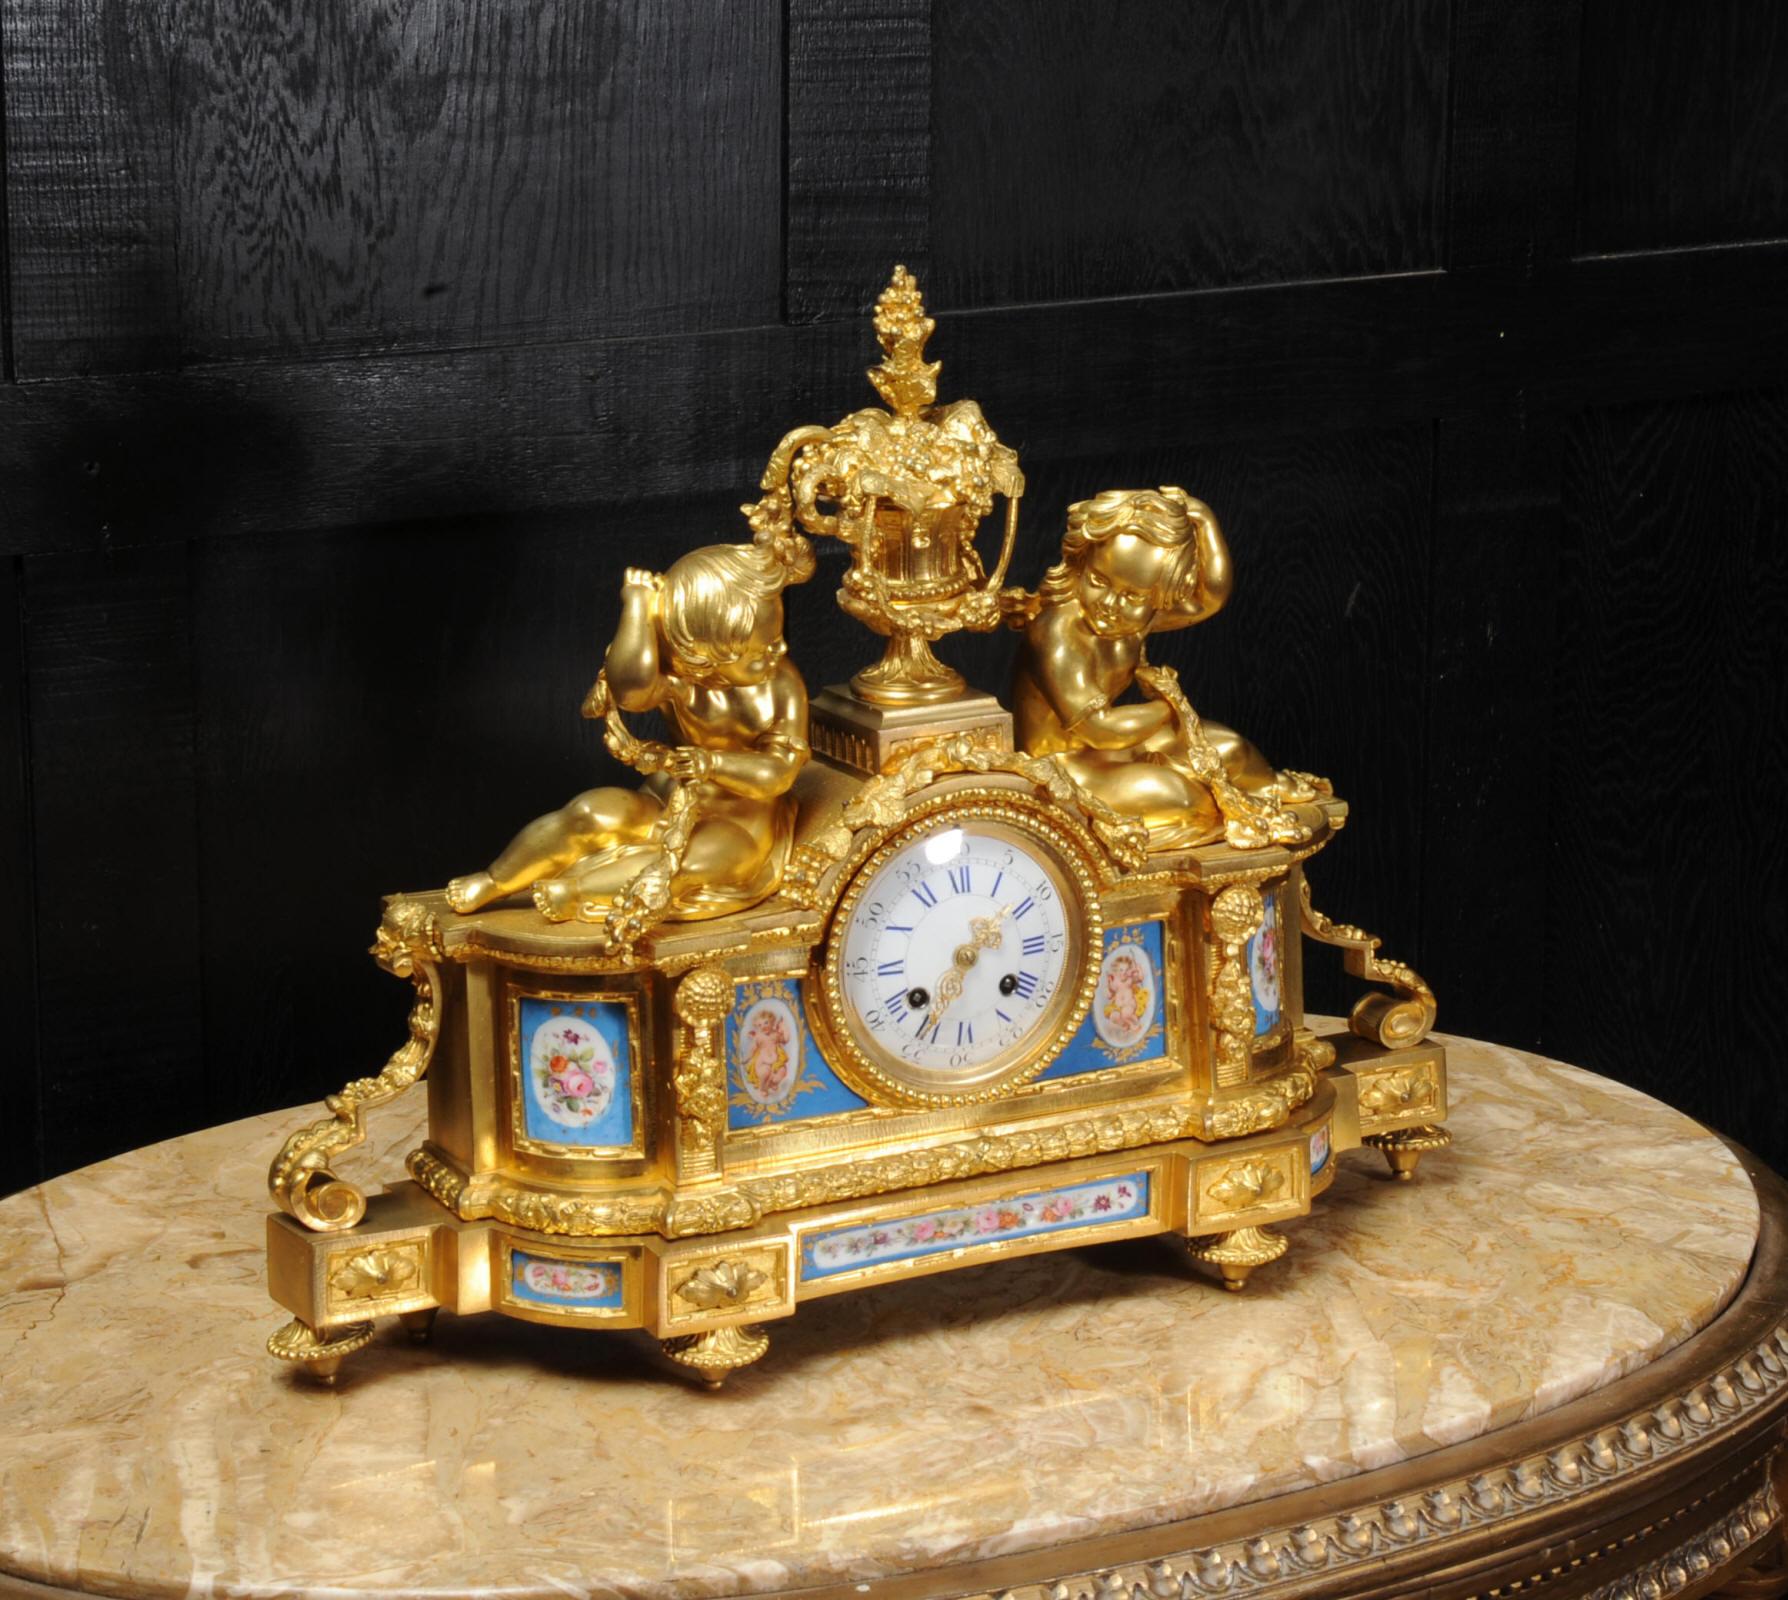 Neoclassical Large Ormolu and Sèvres Porcelain Antique French Clock, Wine Grapes Cherubs